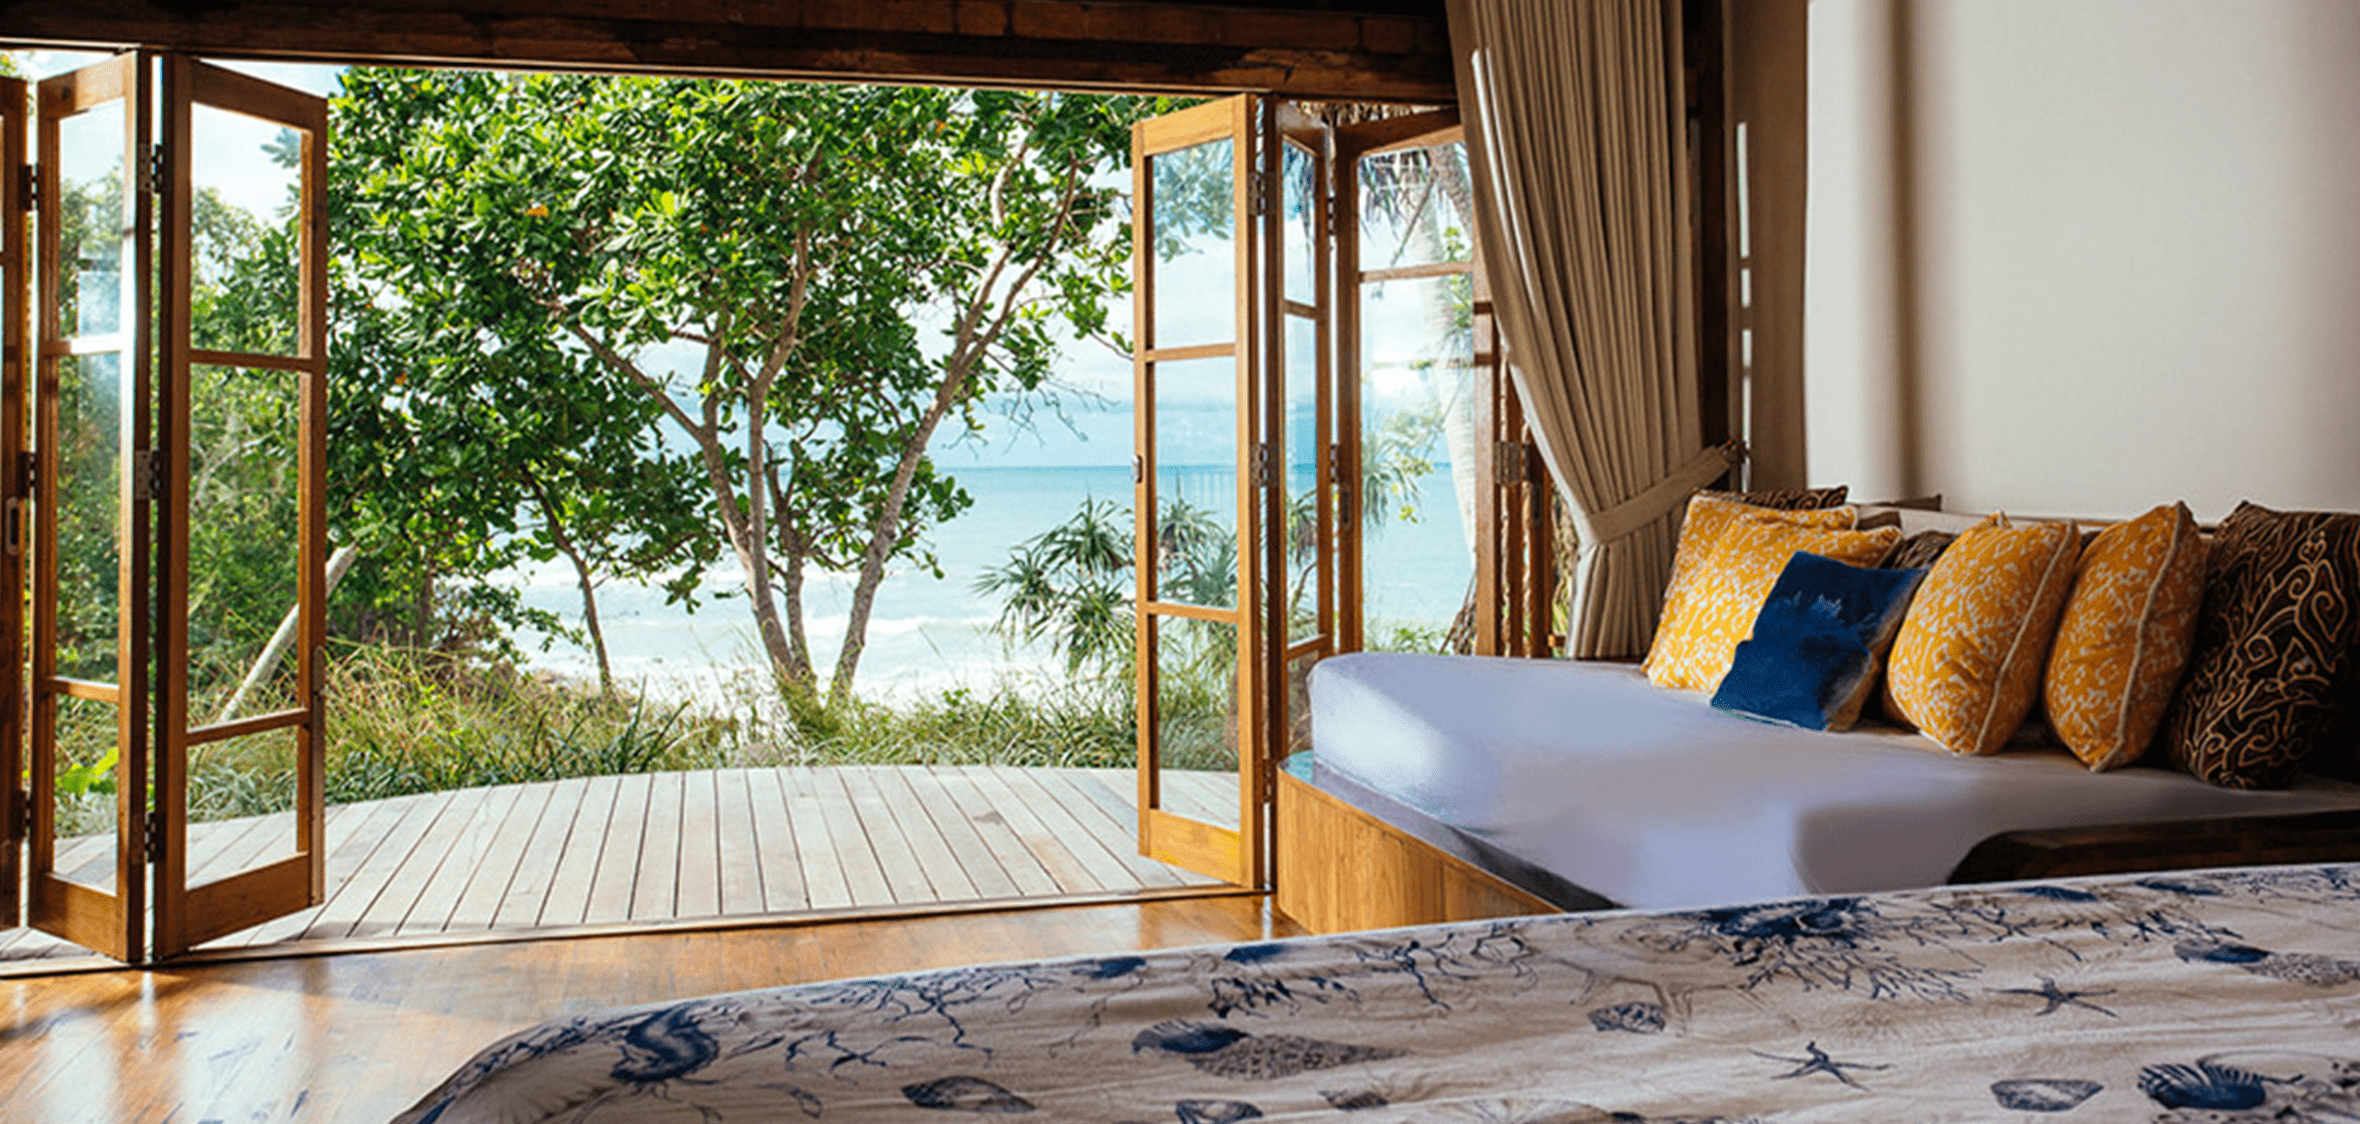 a Bali villa bedroom with view of the ocean